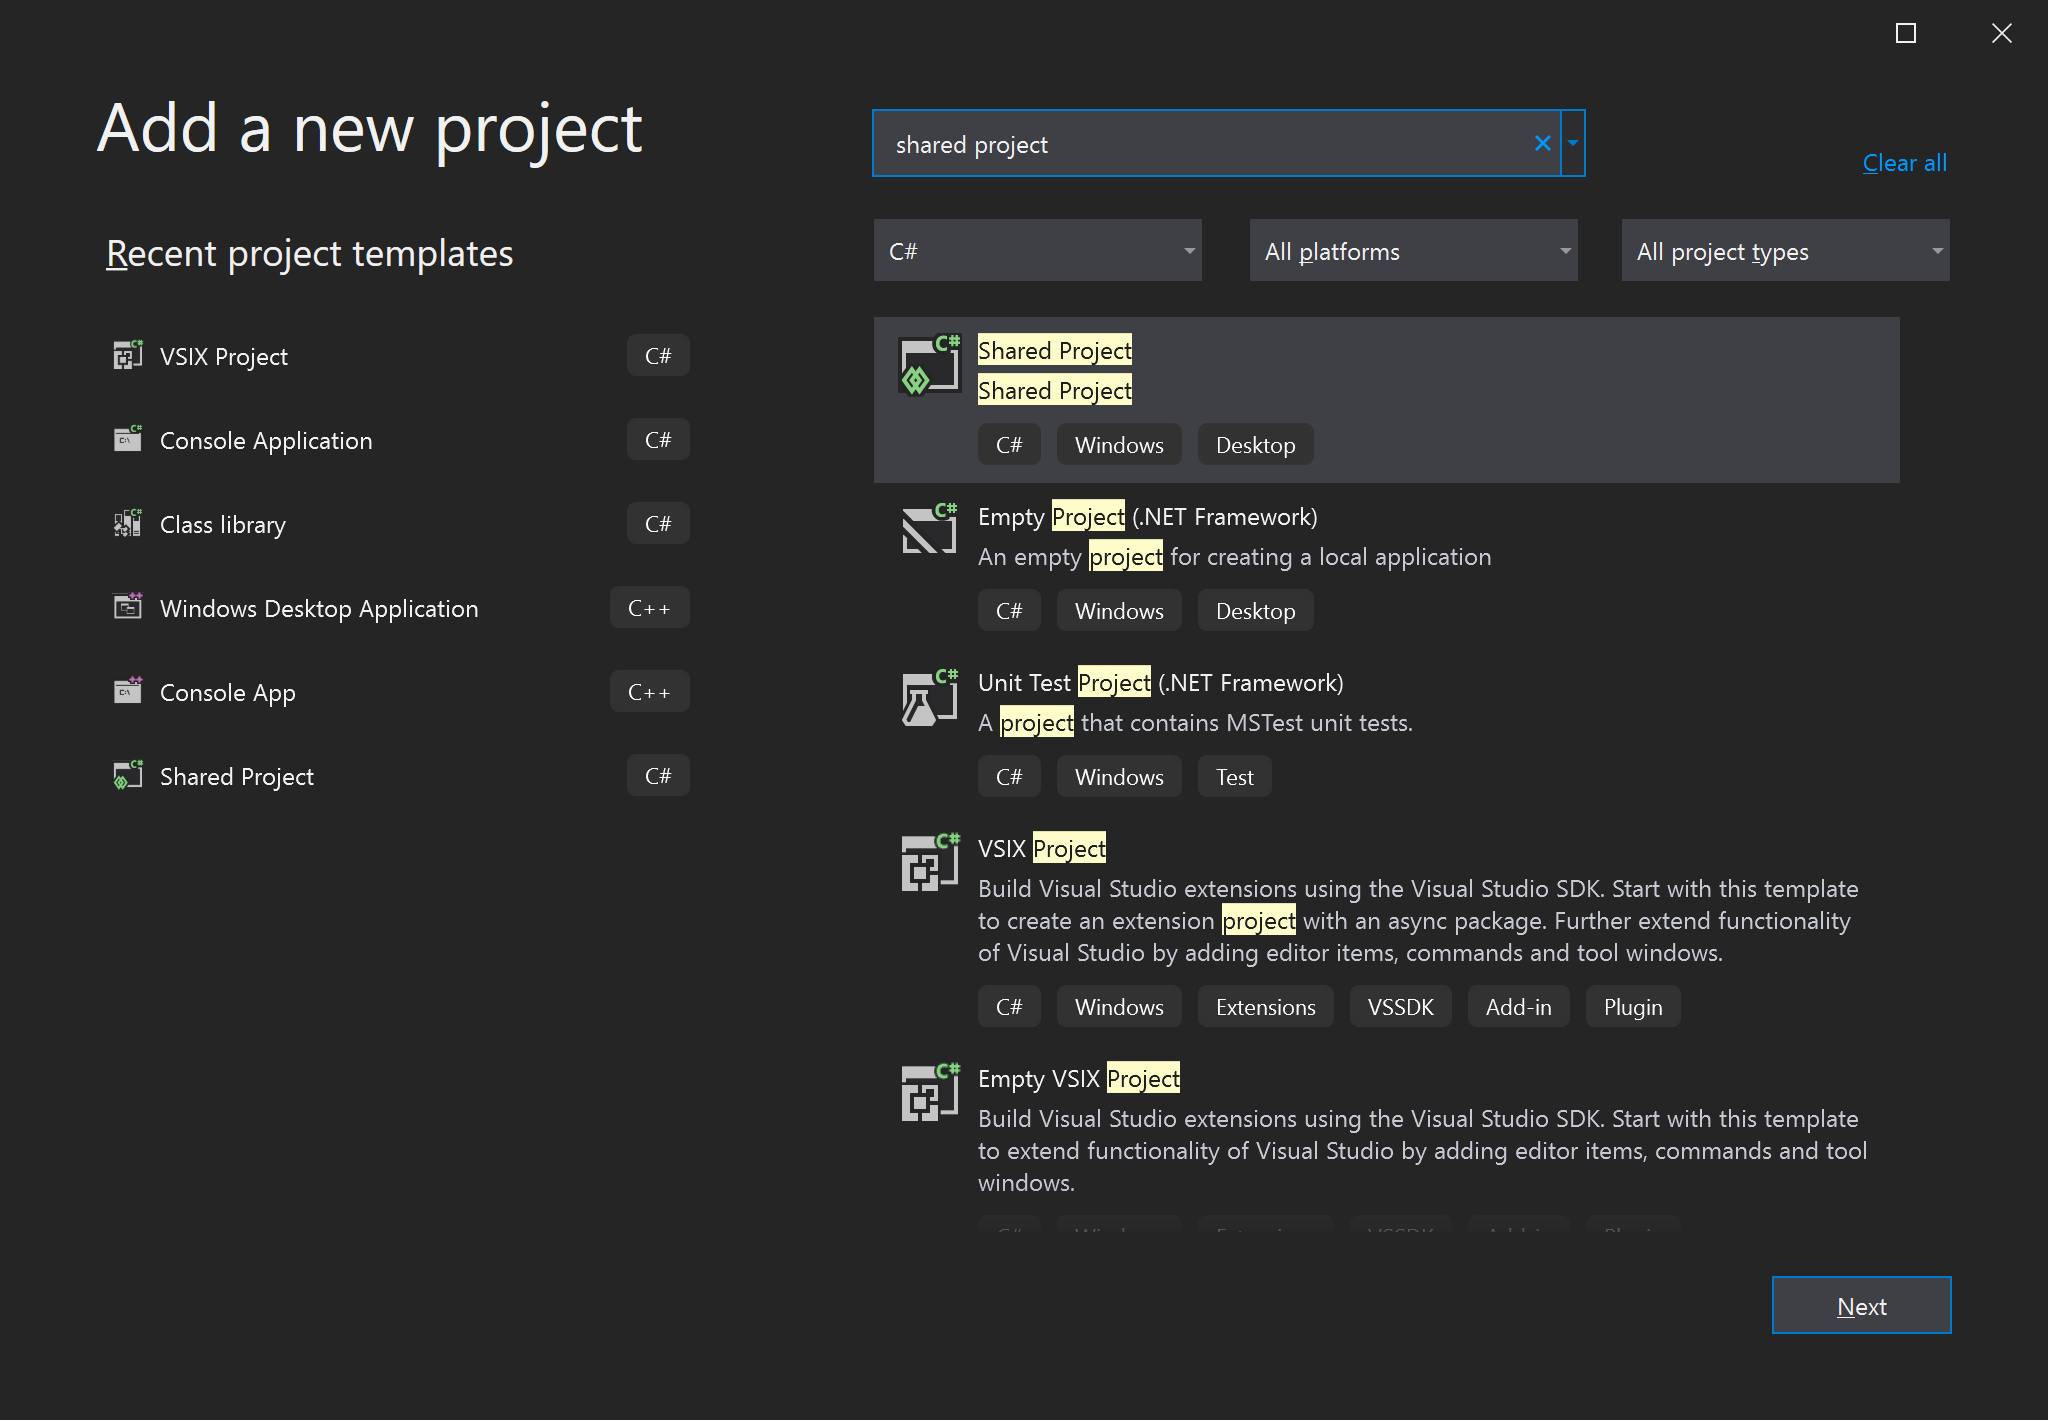 Screenshot that shows searching for and selecting the Shared Project template.